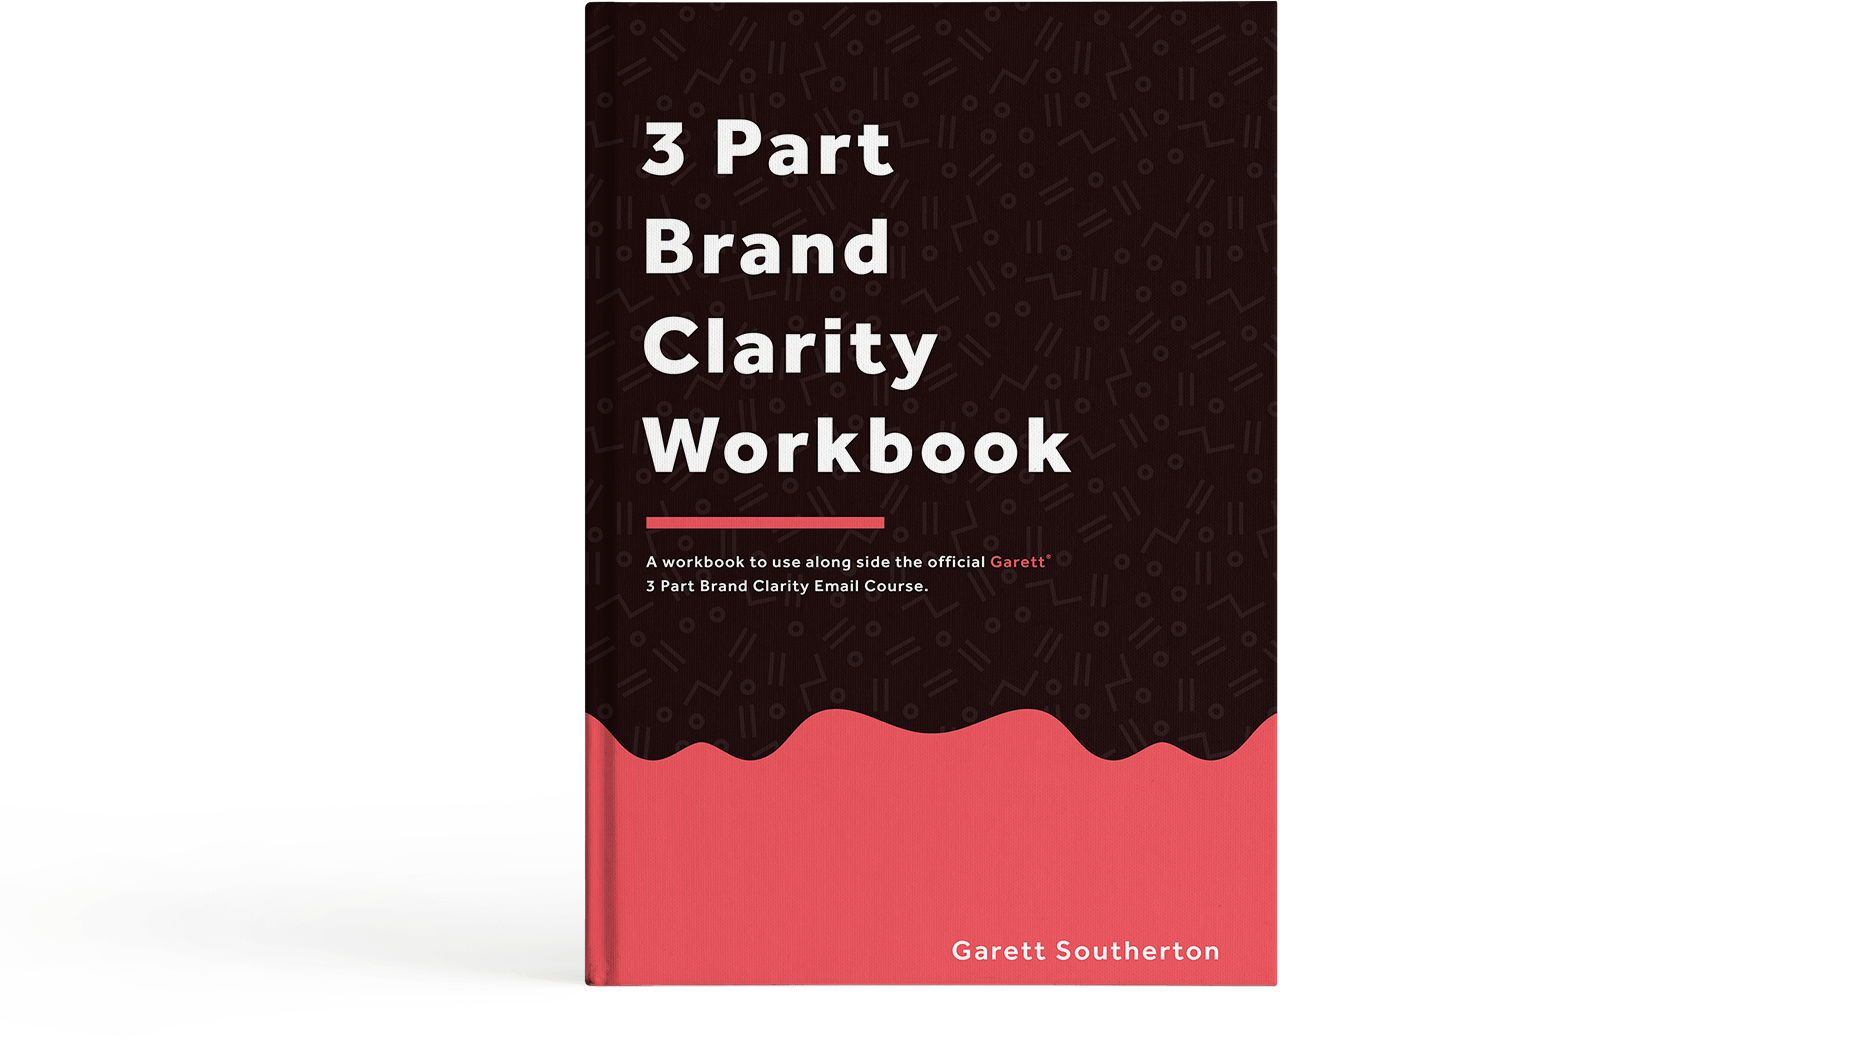 3 Part Brand Clarity Email Course by Garett Southerton